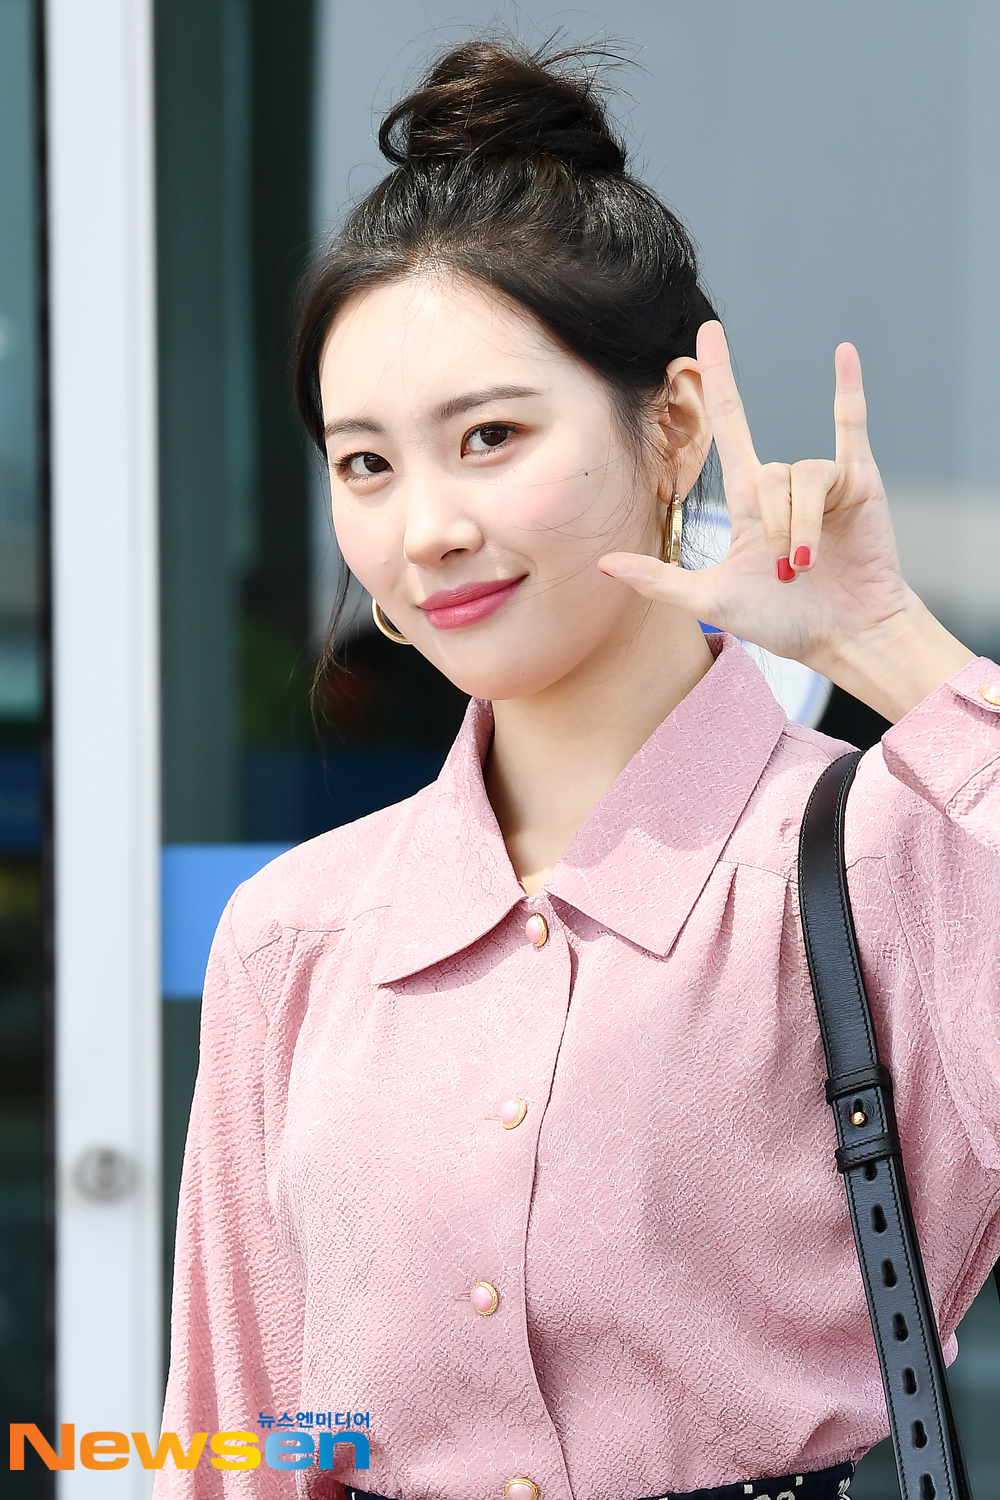 Singer Sunmi (SUNMI) departed for Hong Kong on April 12 afternoon to attend the Sunmi World Tour 2019 SUNMI THE 1ST WORLD TOUR WARNING - HONG KONG schedule through the Incheon International Airport in Unseo-dong, Jung-gu, Incheon.Singer Sunmi (SUNMI) is leaving for Hong Kong with an airport fashion.exponential earthquake